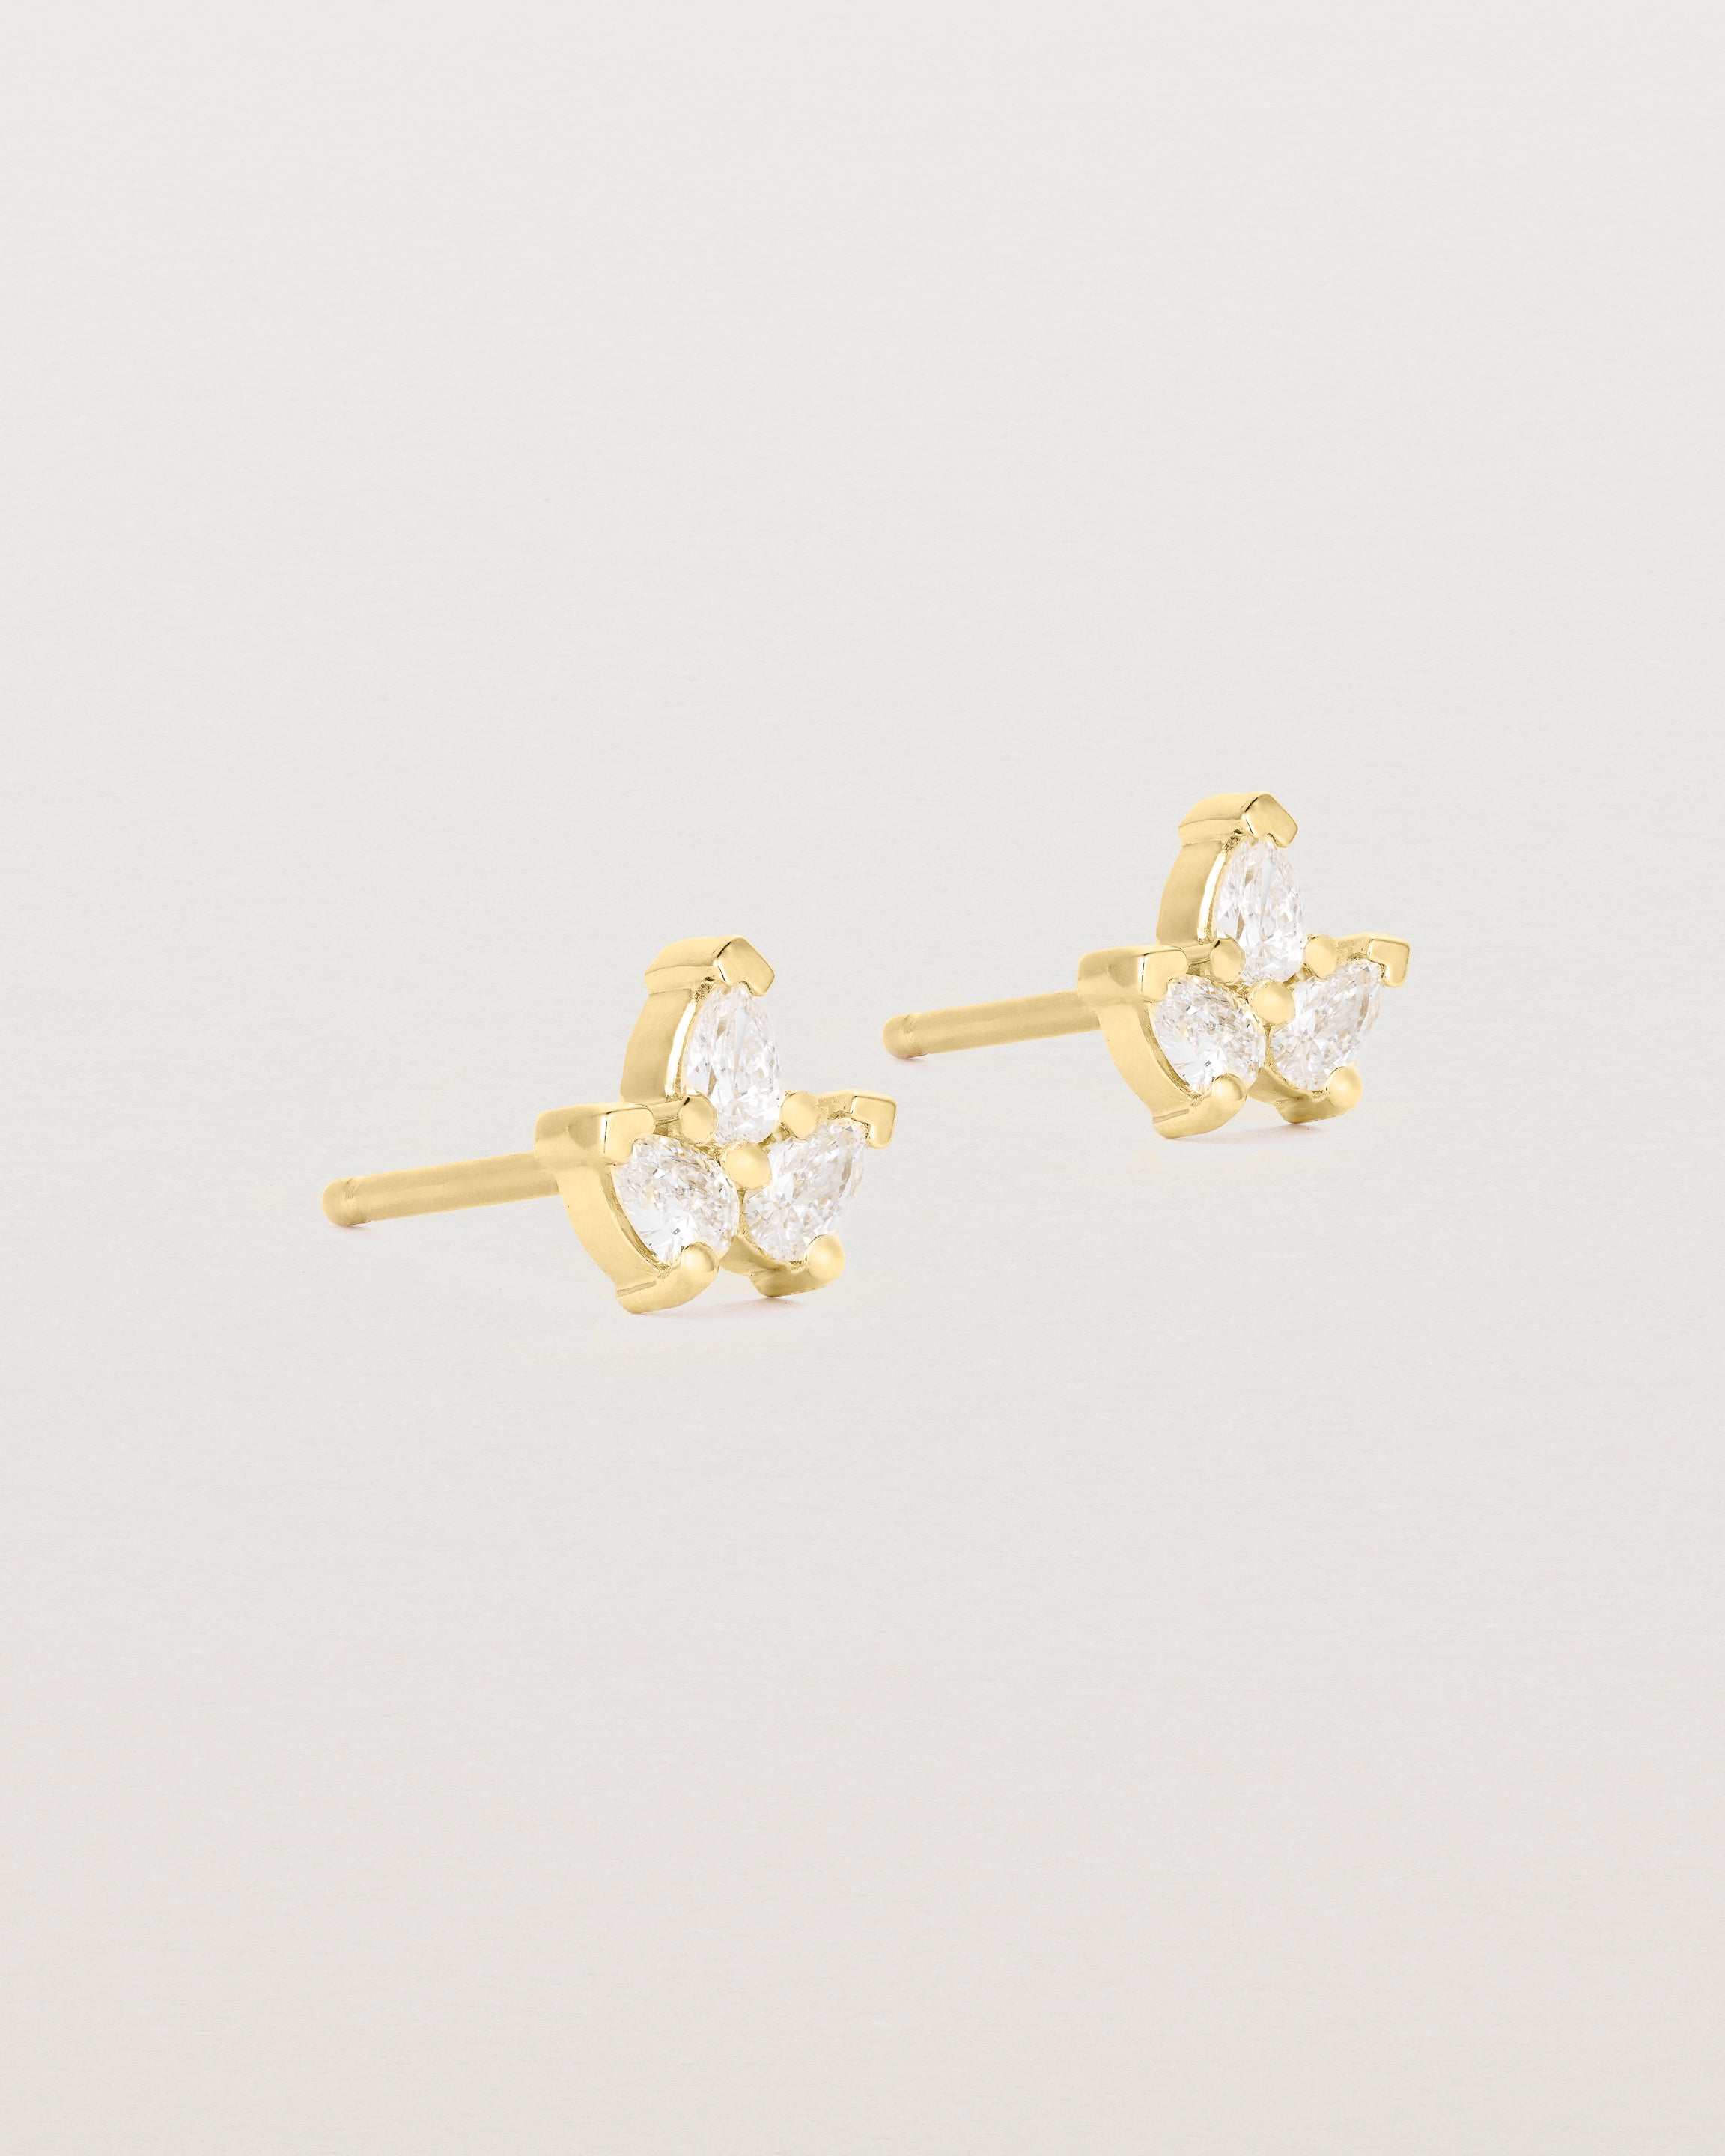 A pair of yellow gold studs featuring three pear shaped diamonds